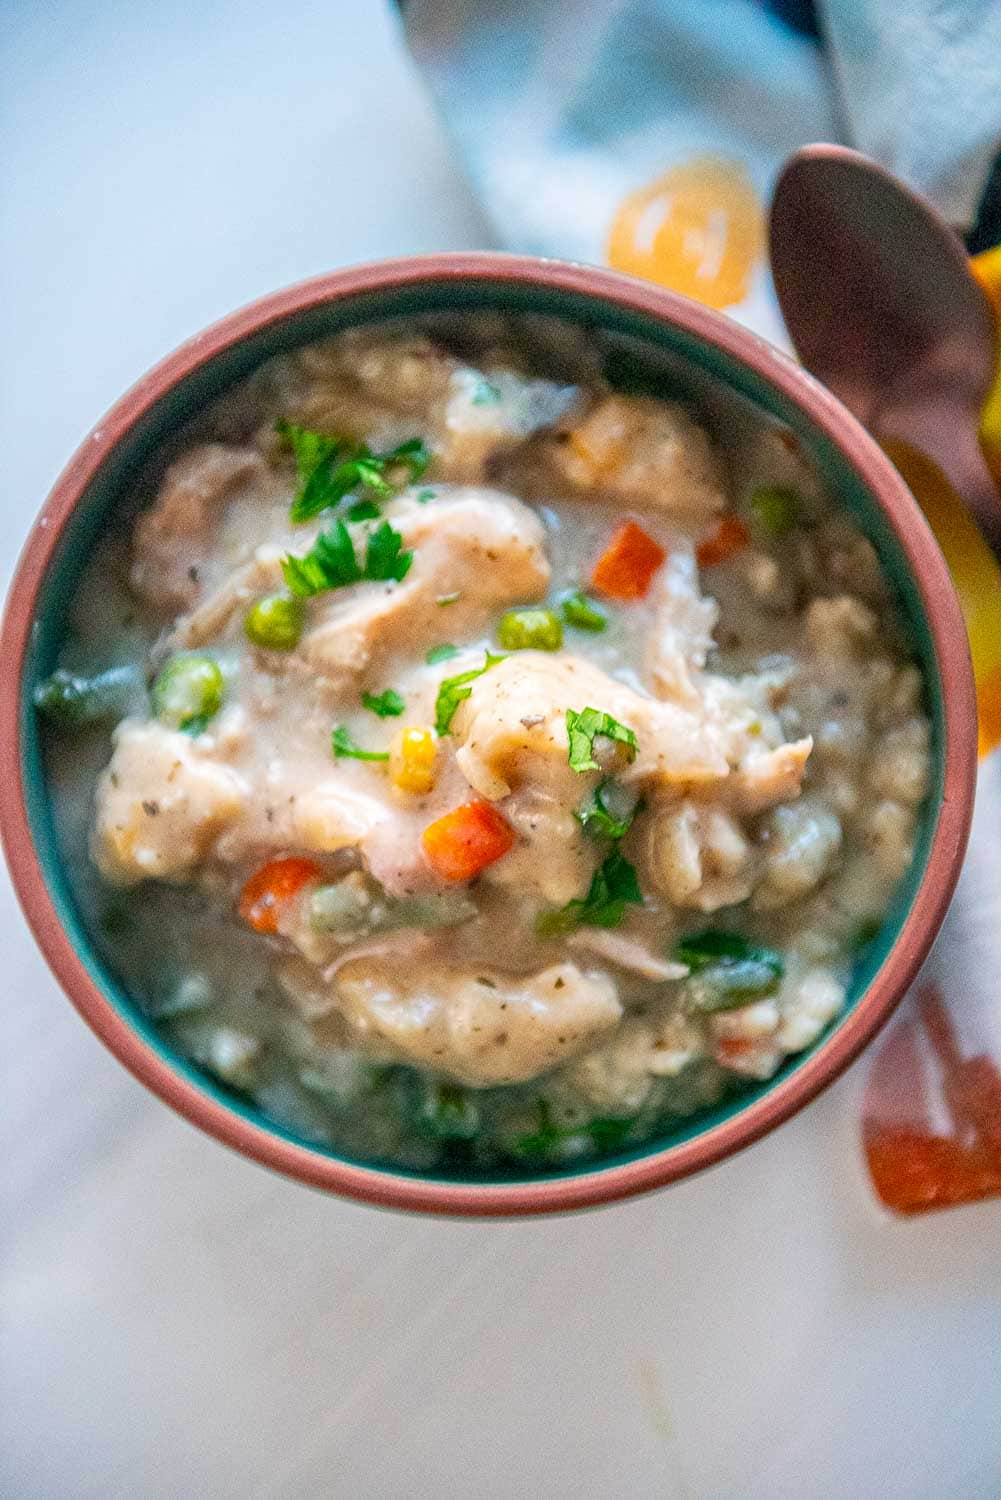 Slow Cooker Chicken and Dumplings served in bowl on table